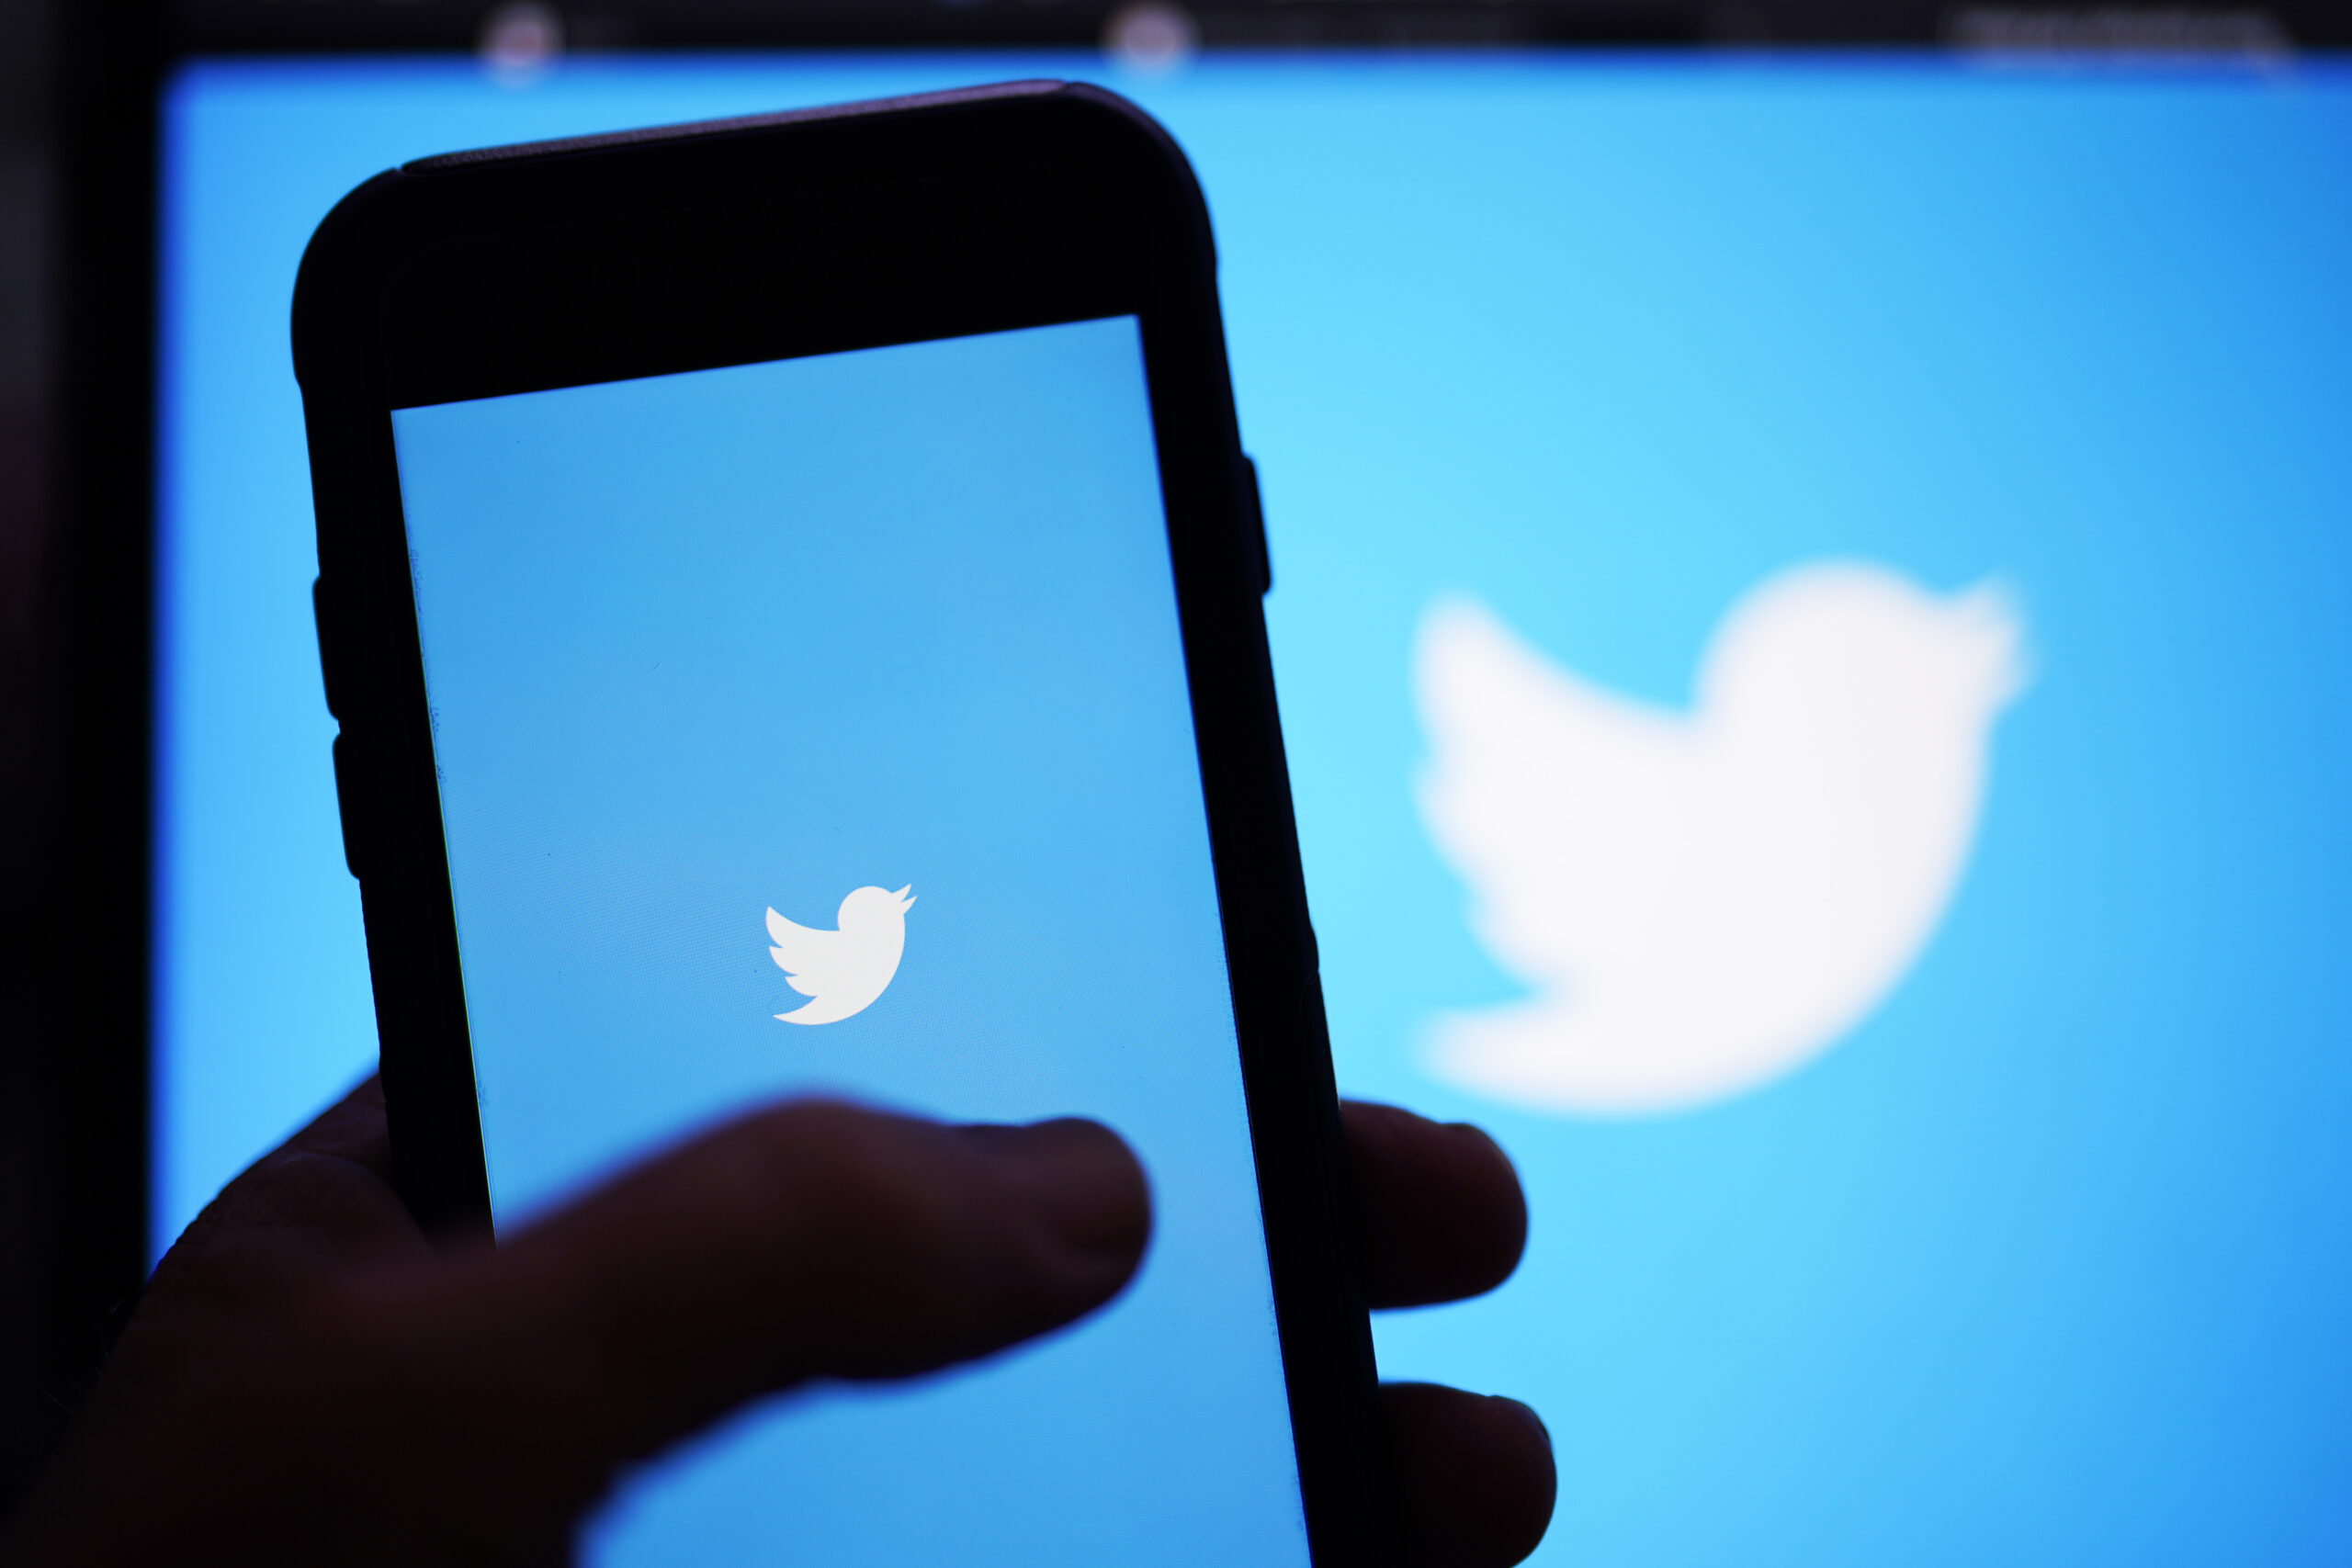 SAN FRANCISCO (AP) — Thousands of people logged complaints about problems accessing Twitter on Sa...